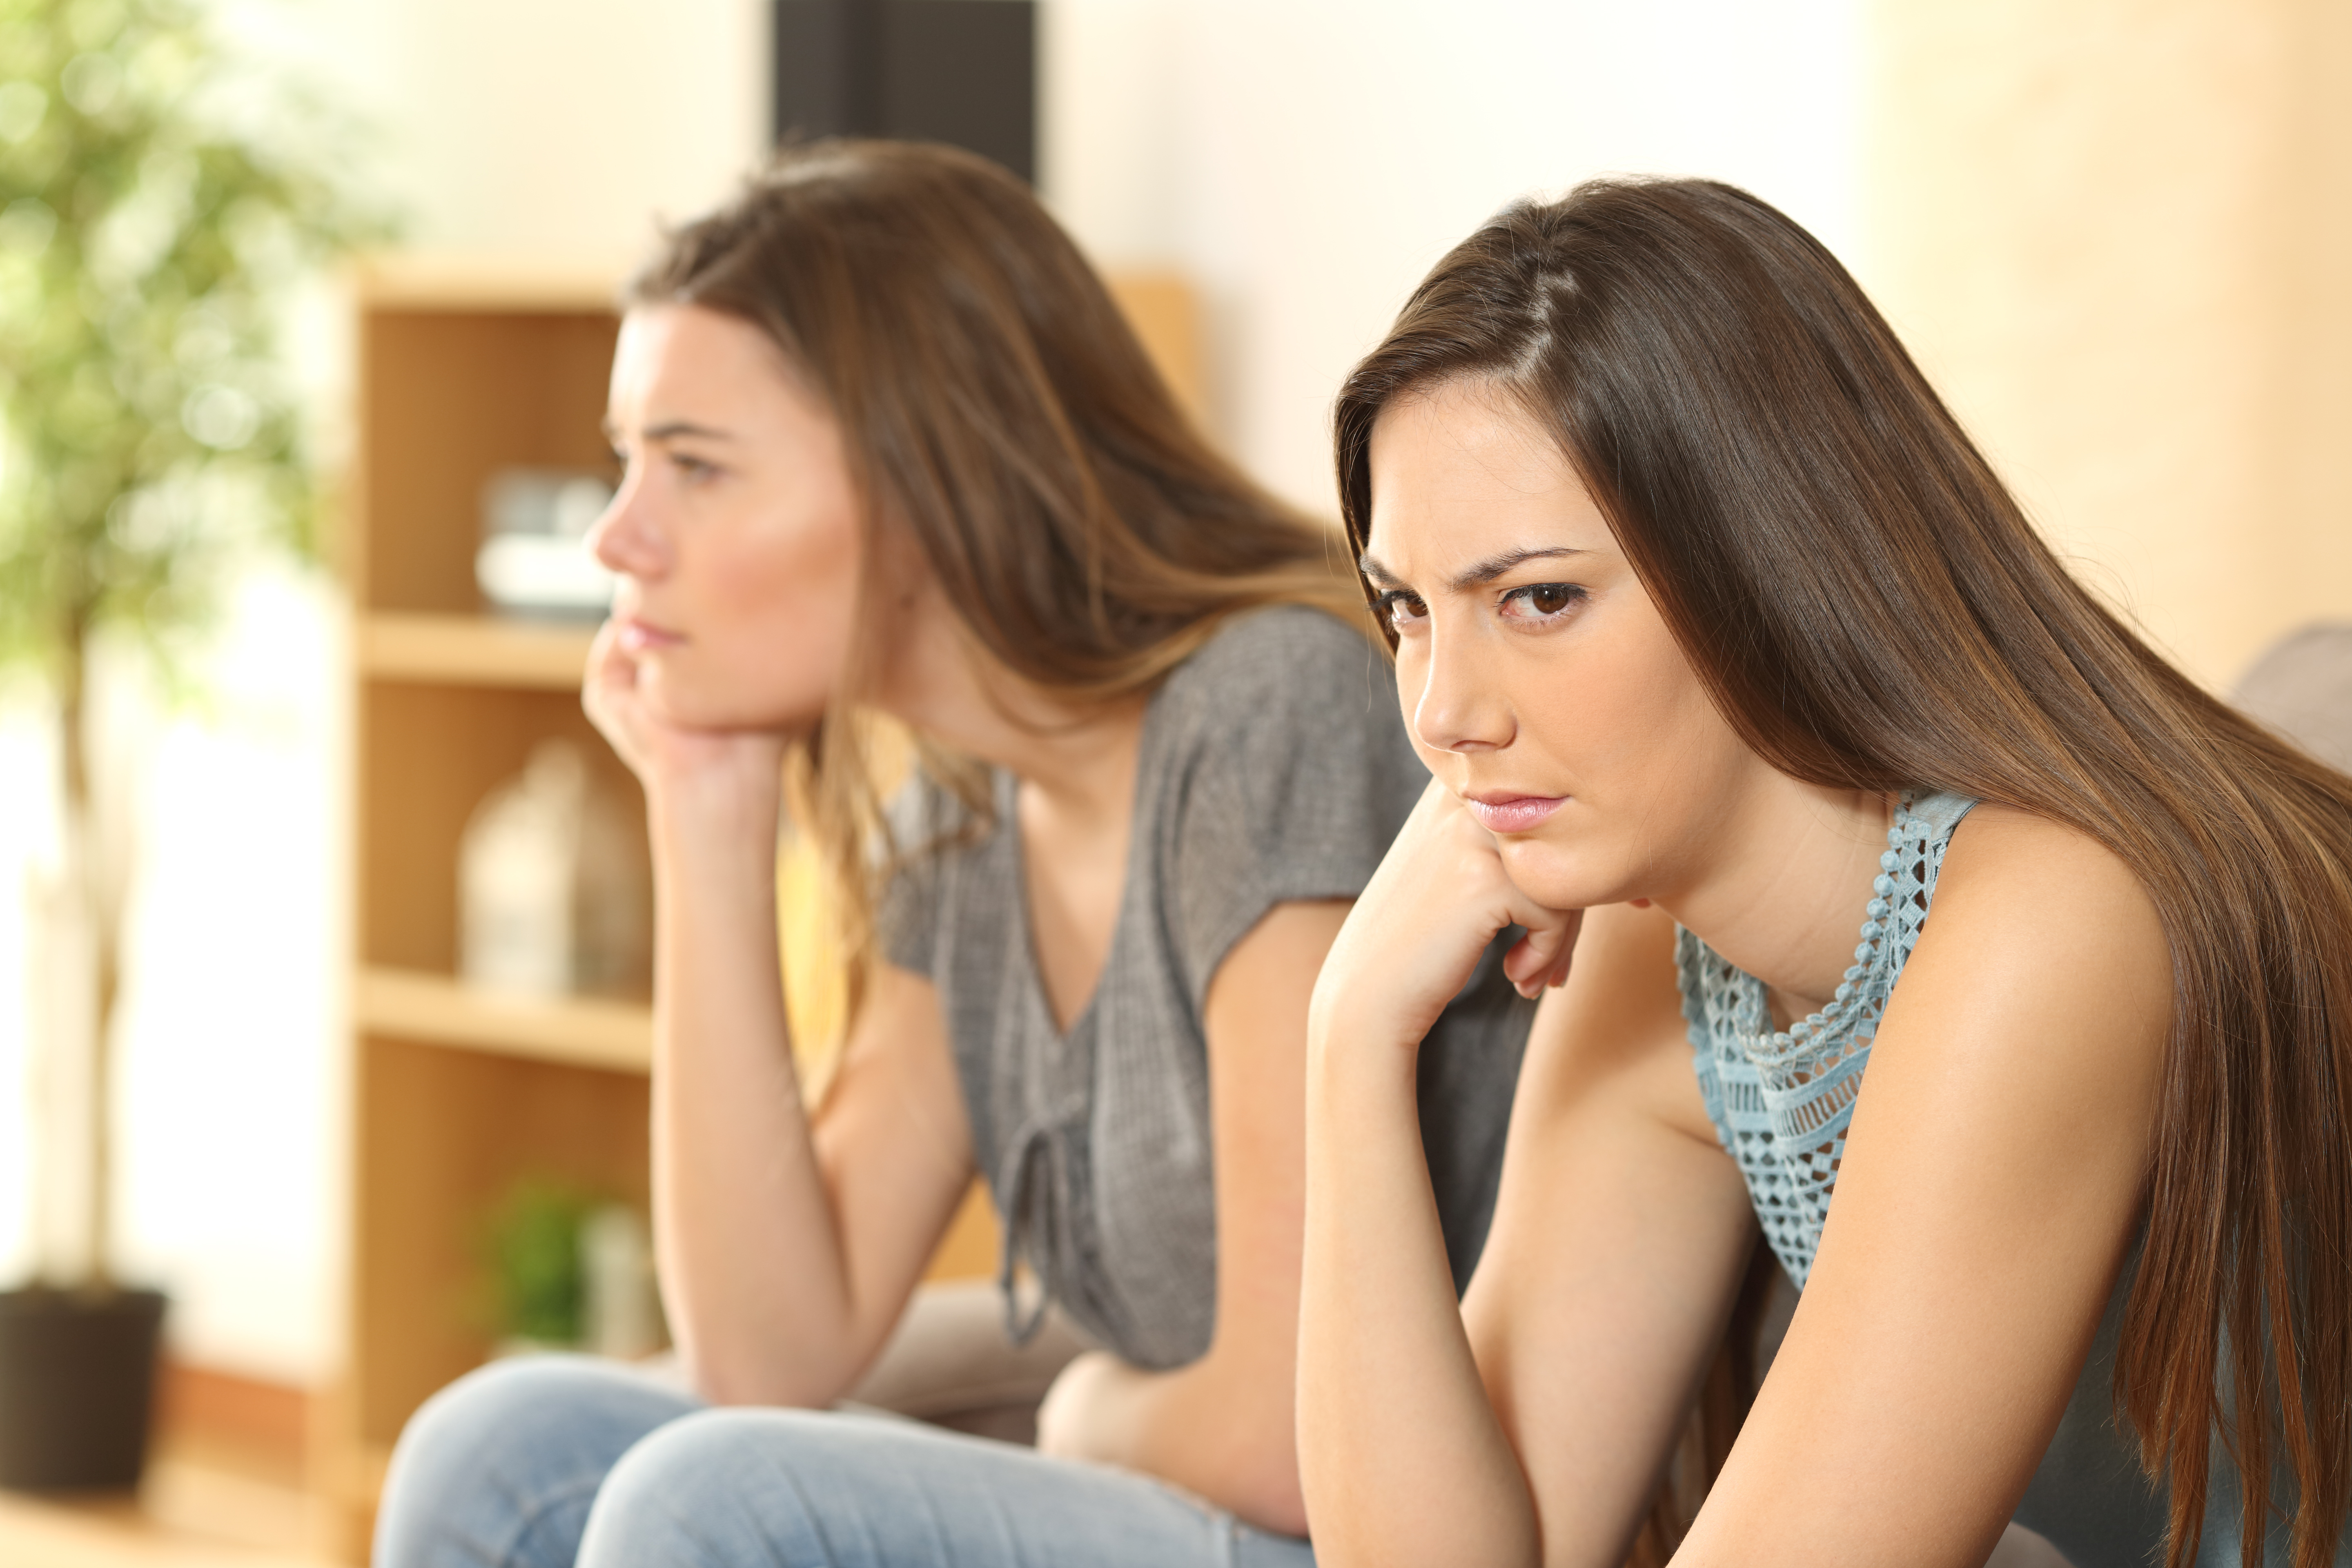 Two sisters sitting on a sofa, not talking | Source: Shutterstock